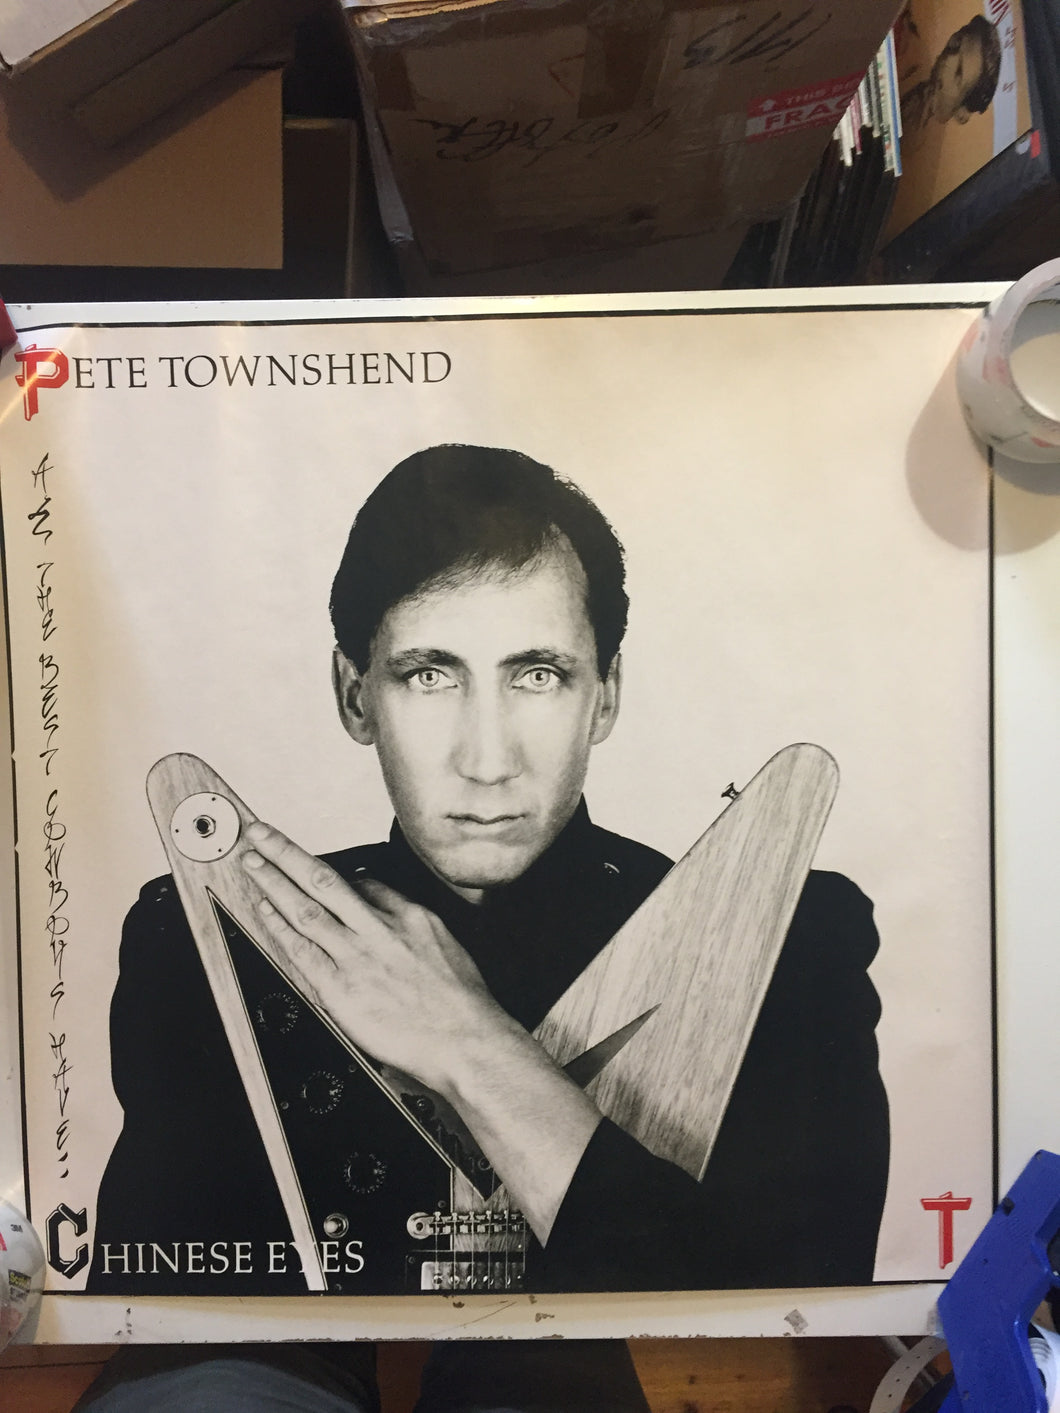 PETE TOWNSHEND - ALL THE BEST COWBOYS... (1992 USED) POSTER